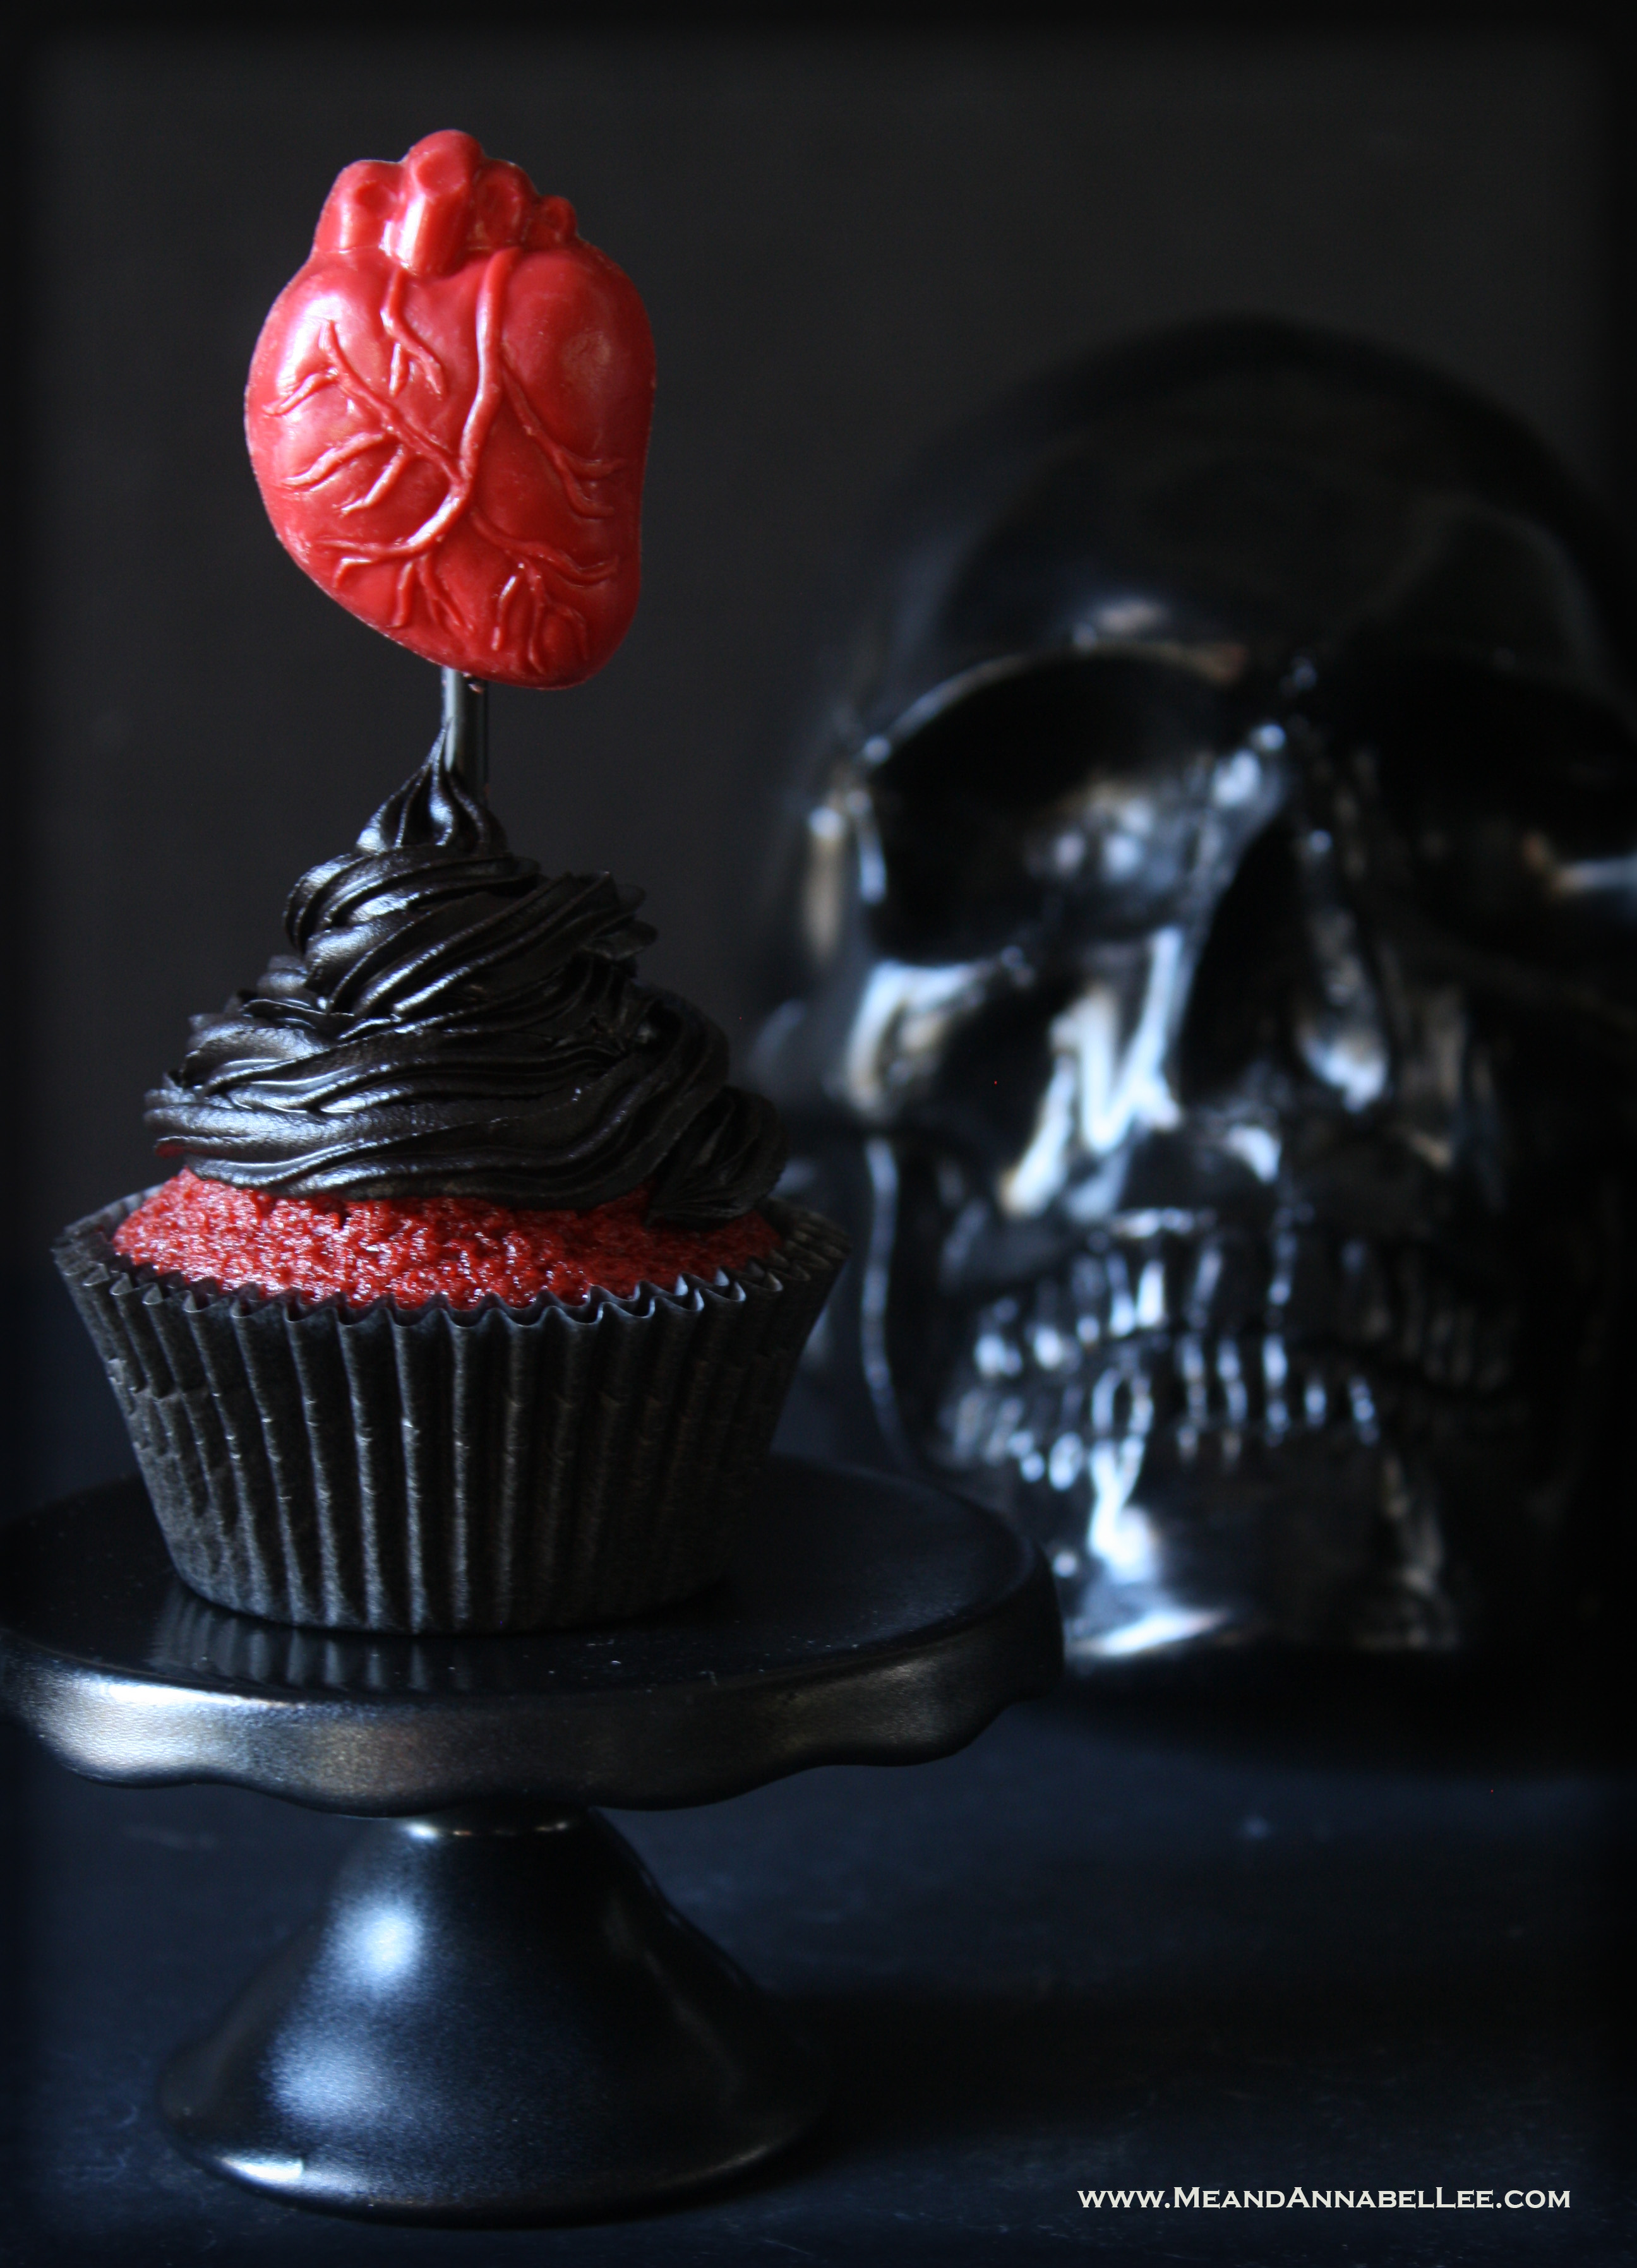 Anti Valentine Anatomical Heart Cupcakes | Red Velvet Cake and Black Fudge Frosting | Halloween Treats | www.MeandAnnabelLee.com